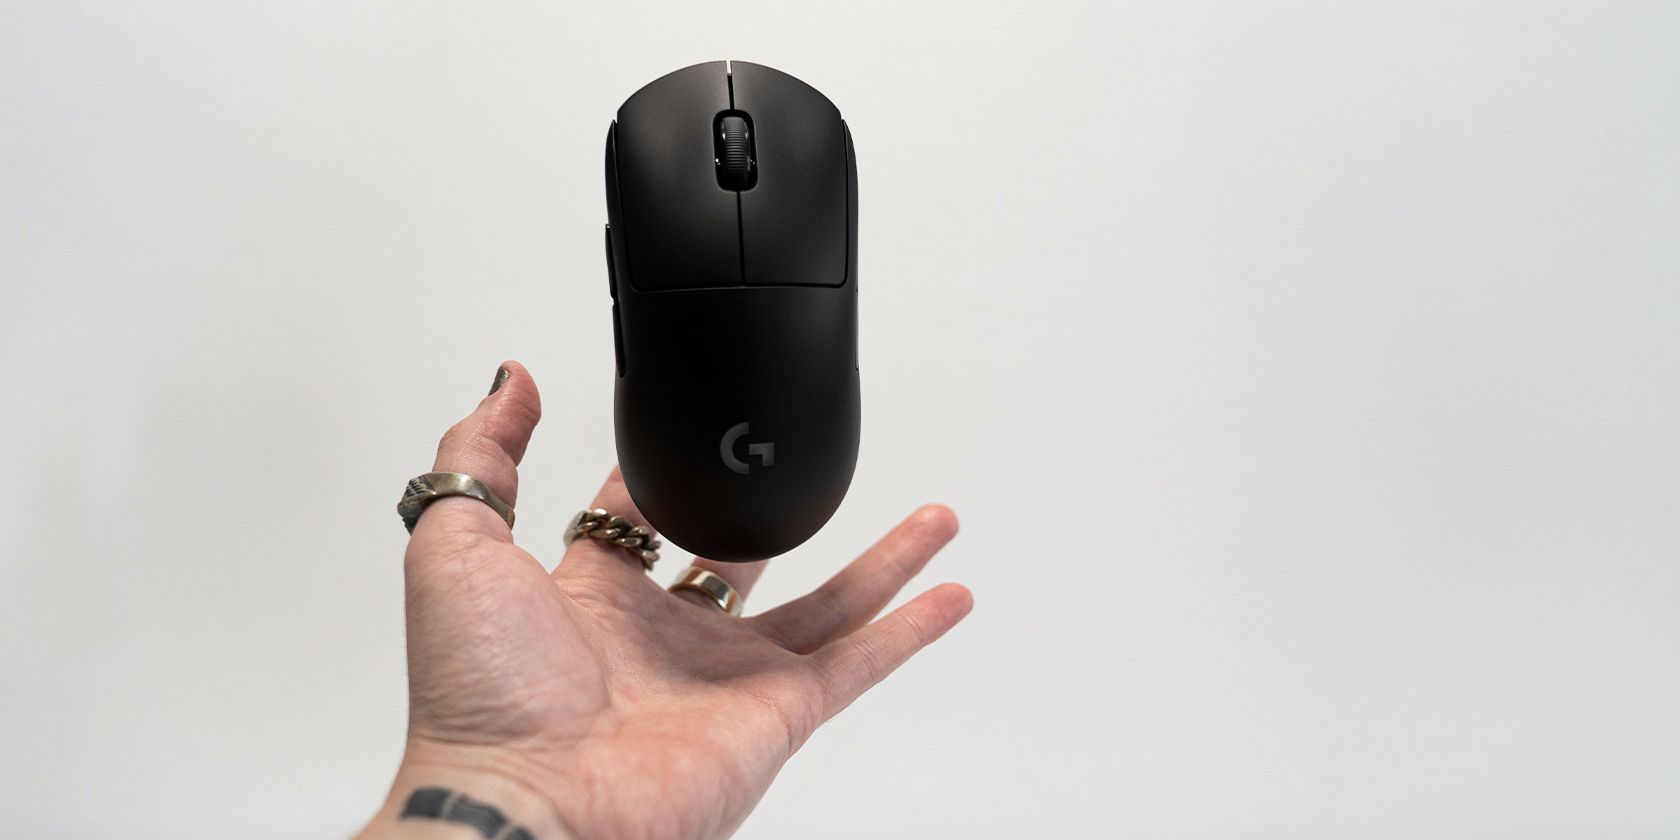 A person holding a black Logitech wireless computer mouse